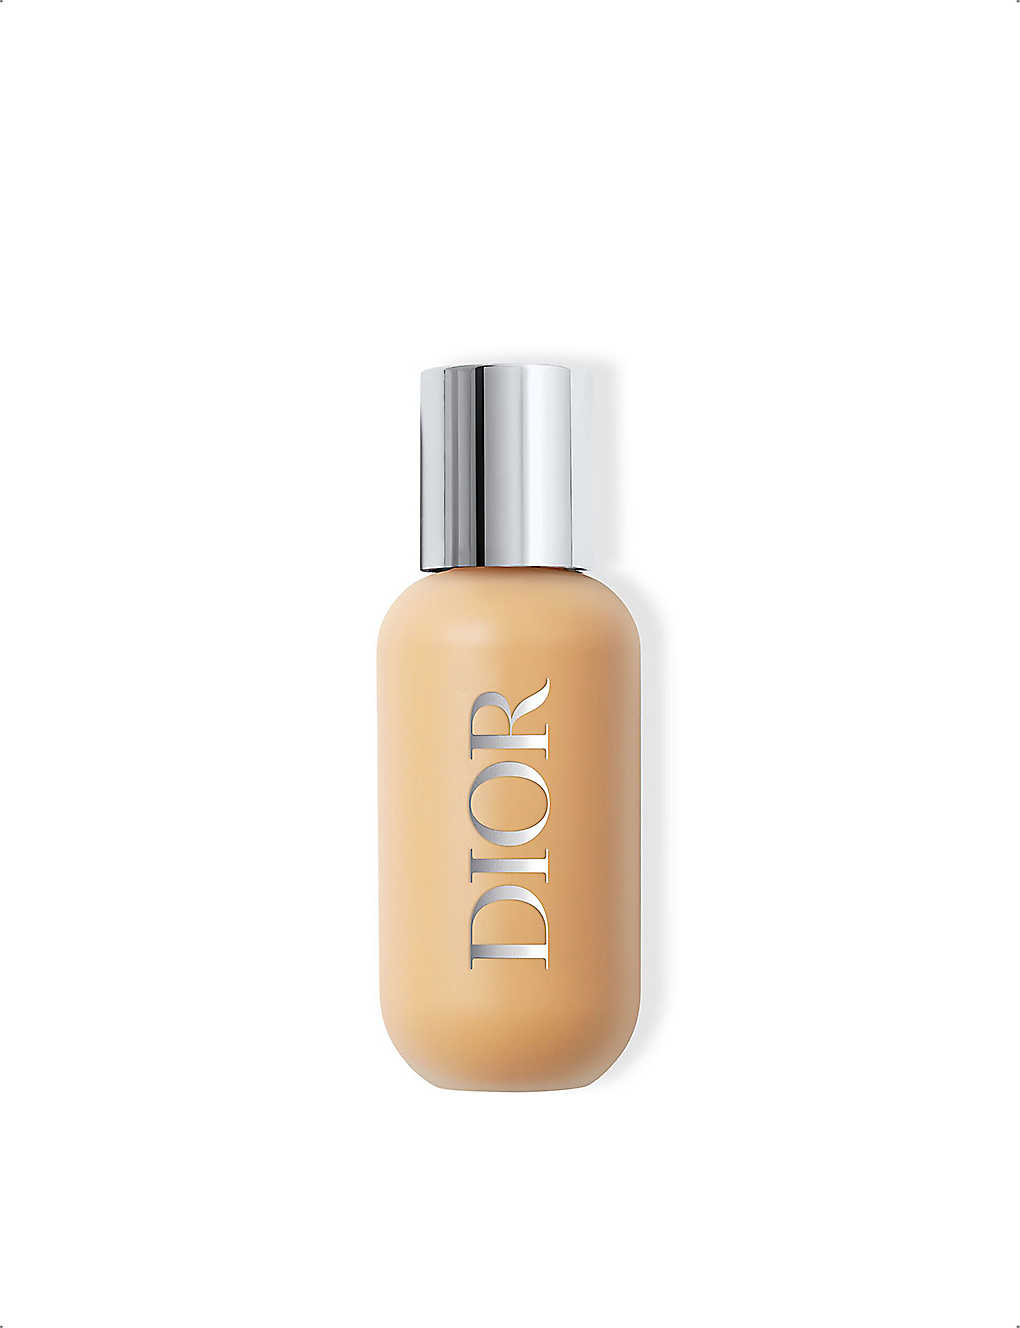 Dior Backstage Face & Body Foundation 50ml In 4wo